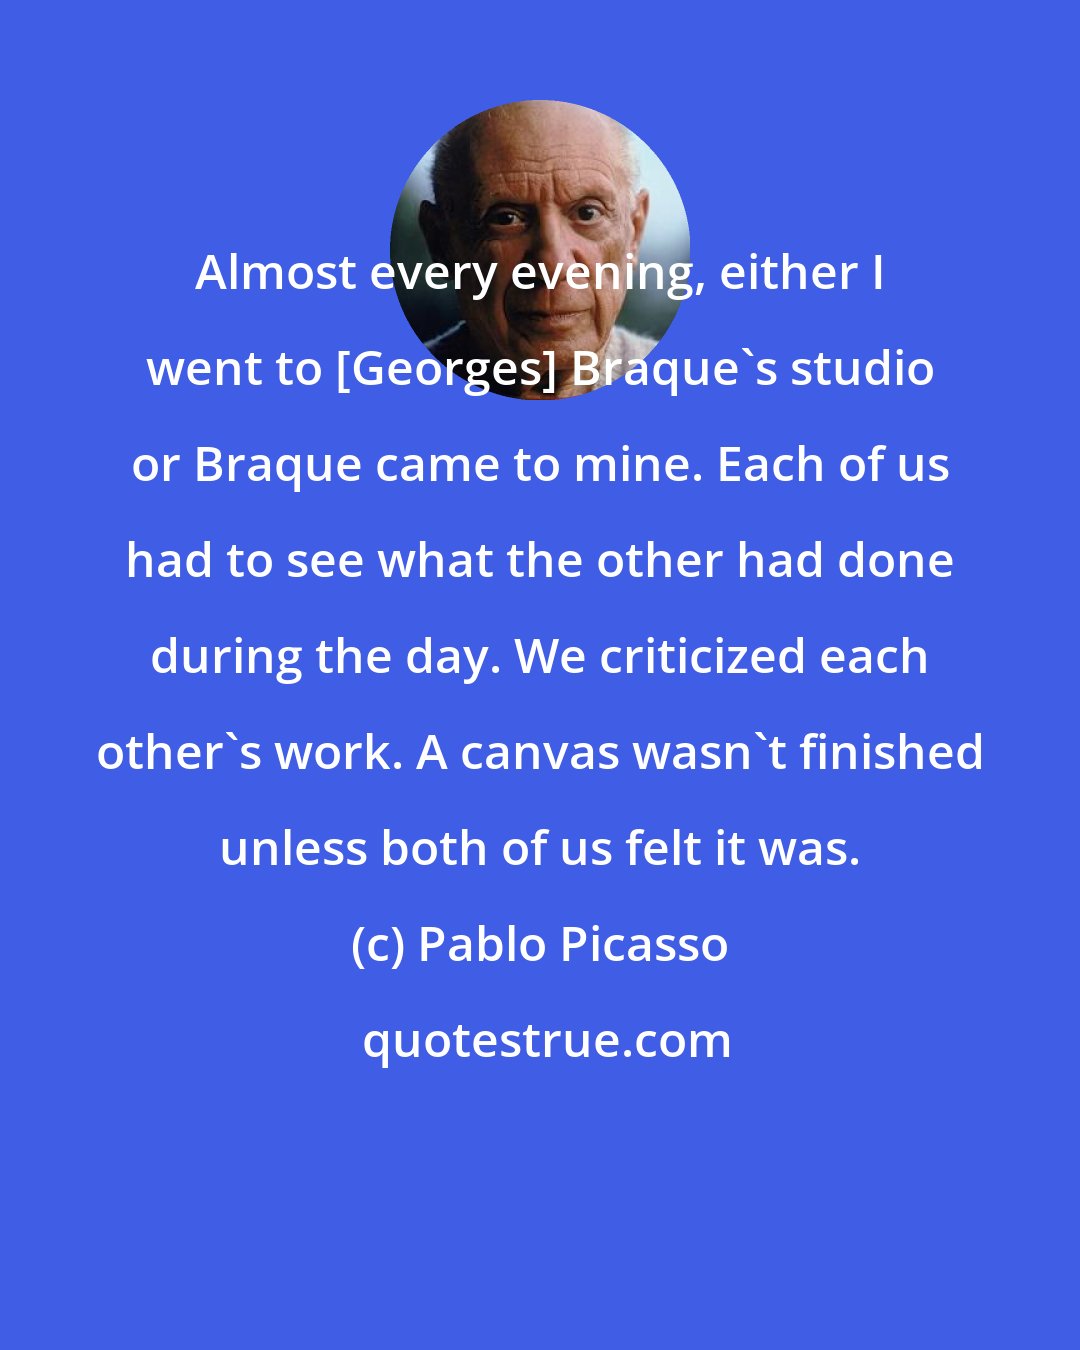 Pablo Picasso: Almost every evening, either I went to [Georges] Braque's studio or Braque came to mine. Each of us had to see what the other had done during the day. We criticized each other's work. A canvas wasn't finished unless both of us felt it was.